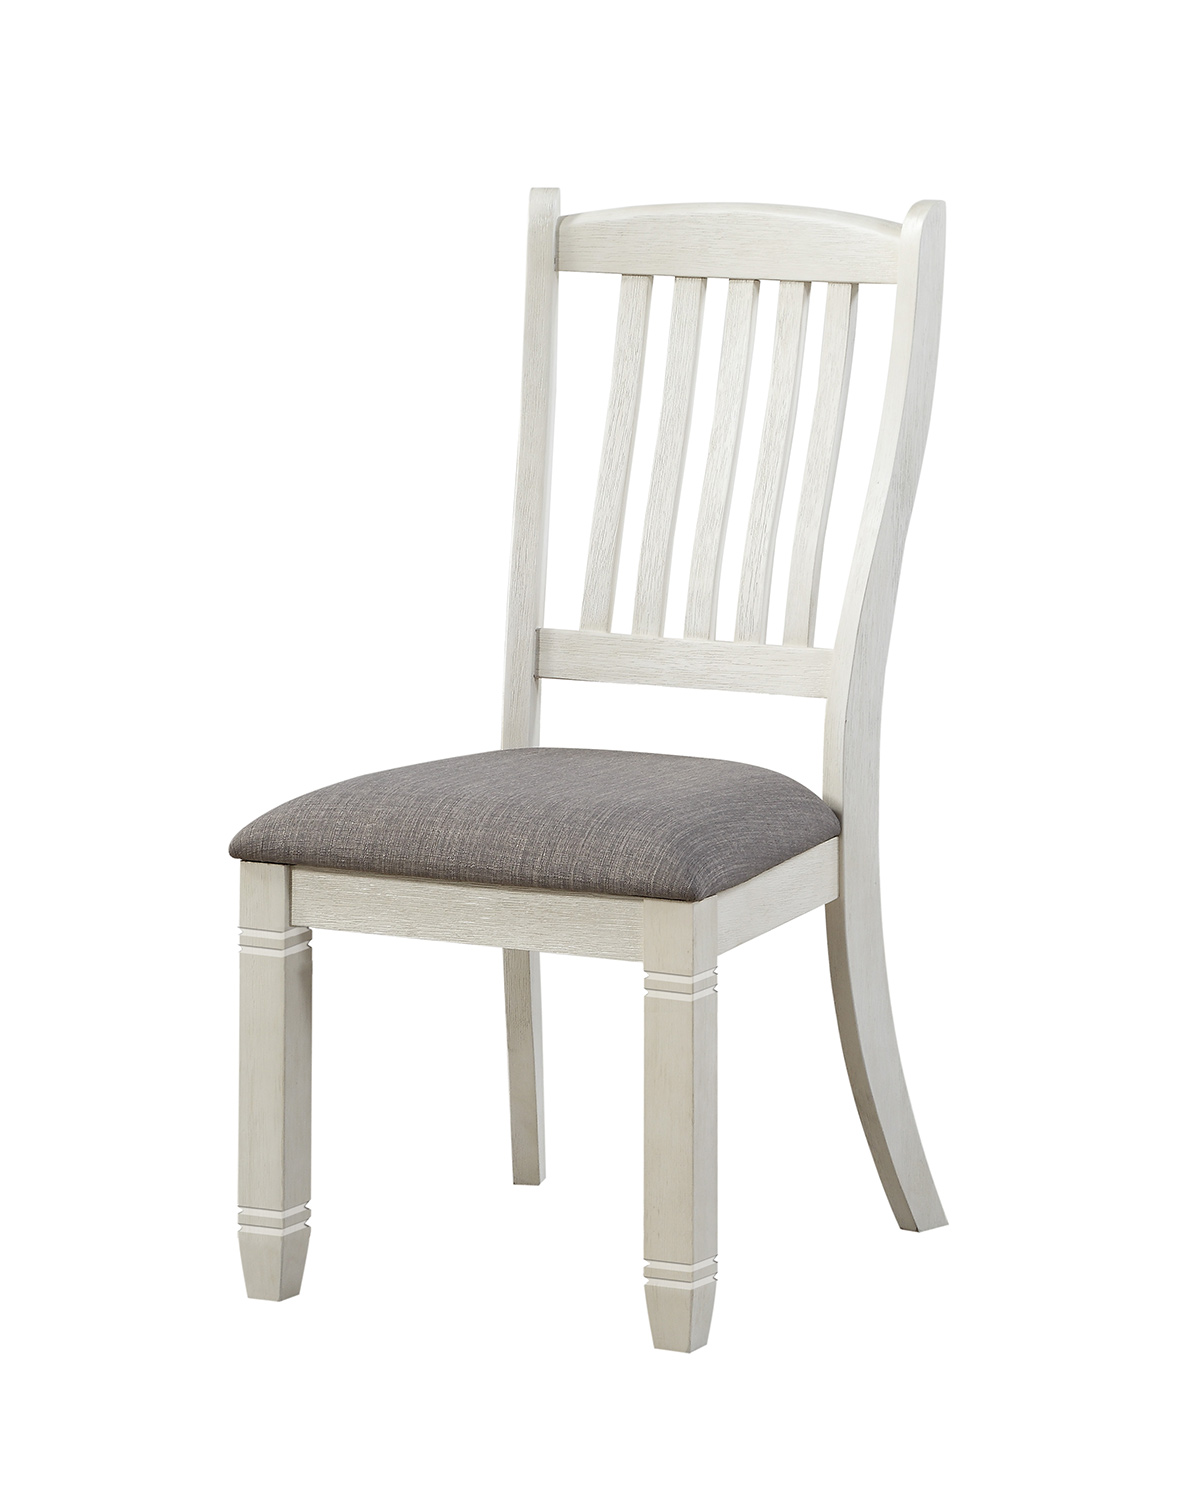 Homelegance Granby Side Chair - Antique White - Rosy Brown